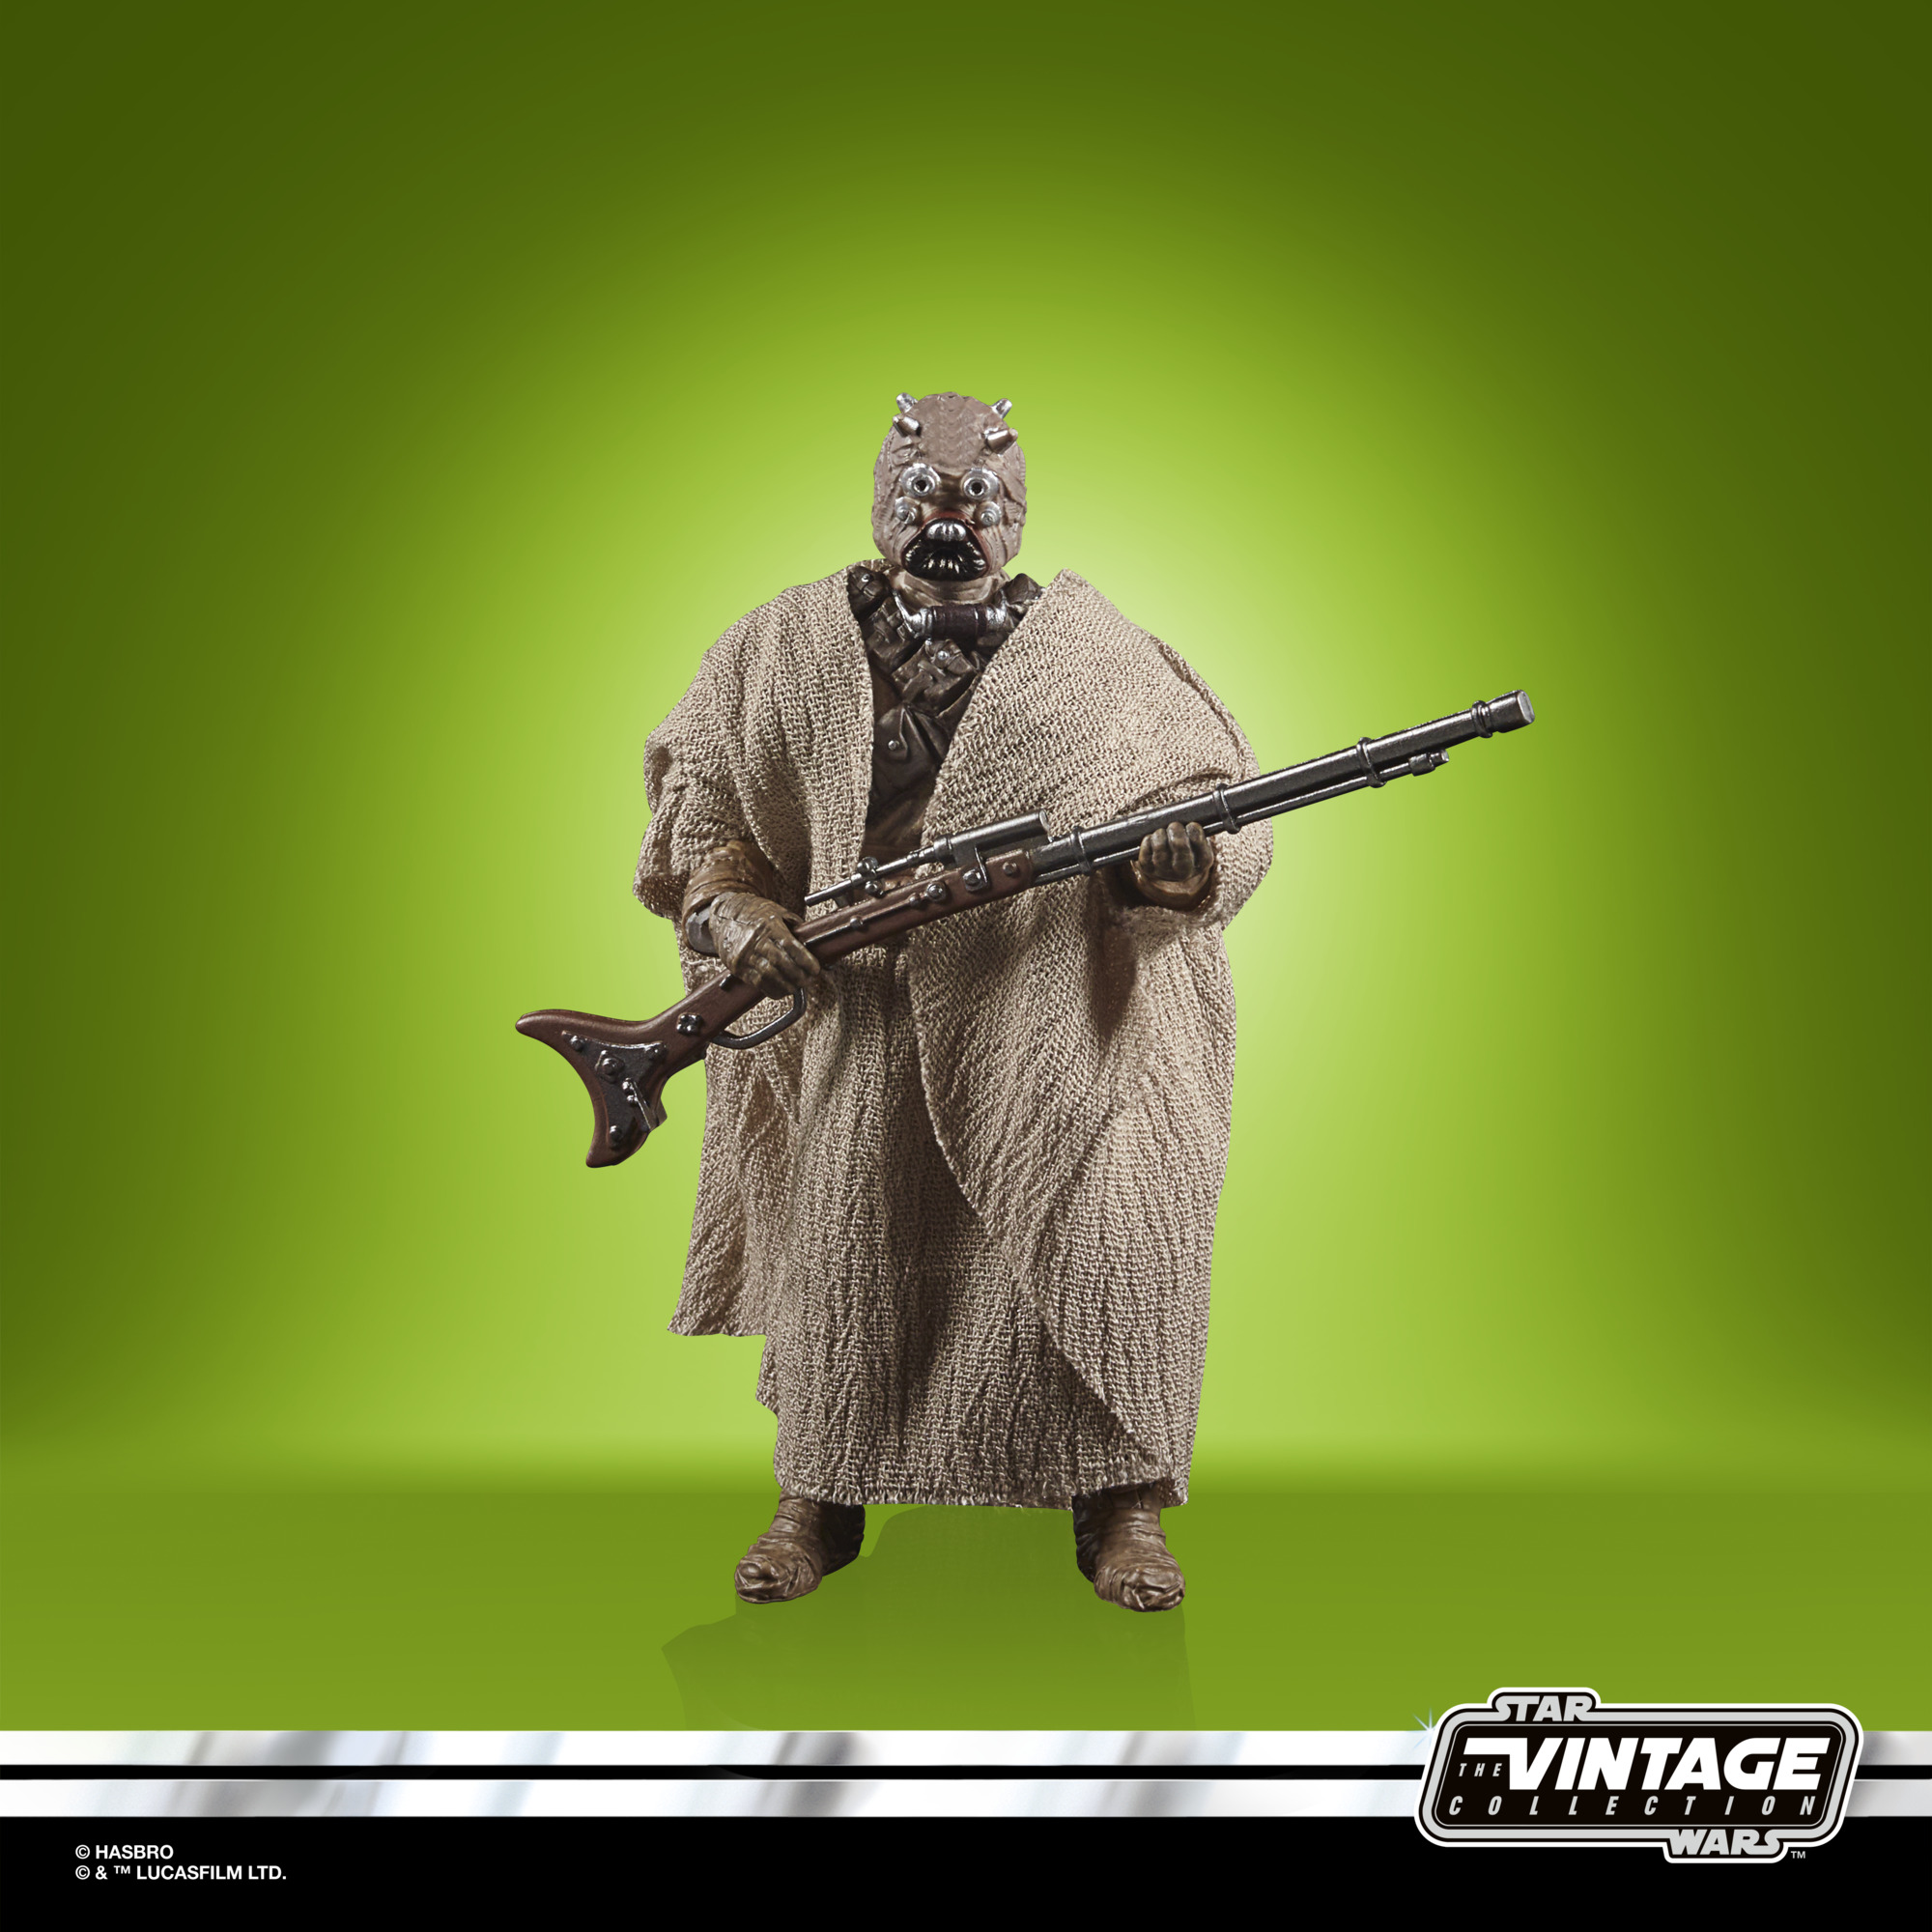 Star Wars The Vintage Collection Tusken Raider LUCASFILM 50TH ANNIVERSARY F31185L00 05010993898212